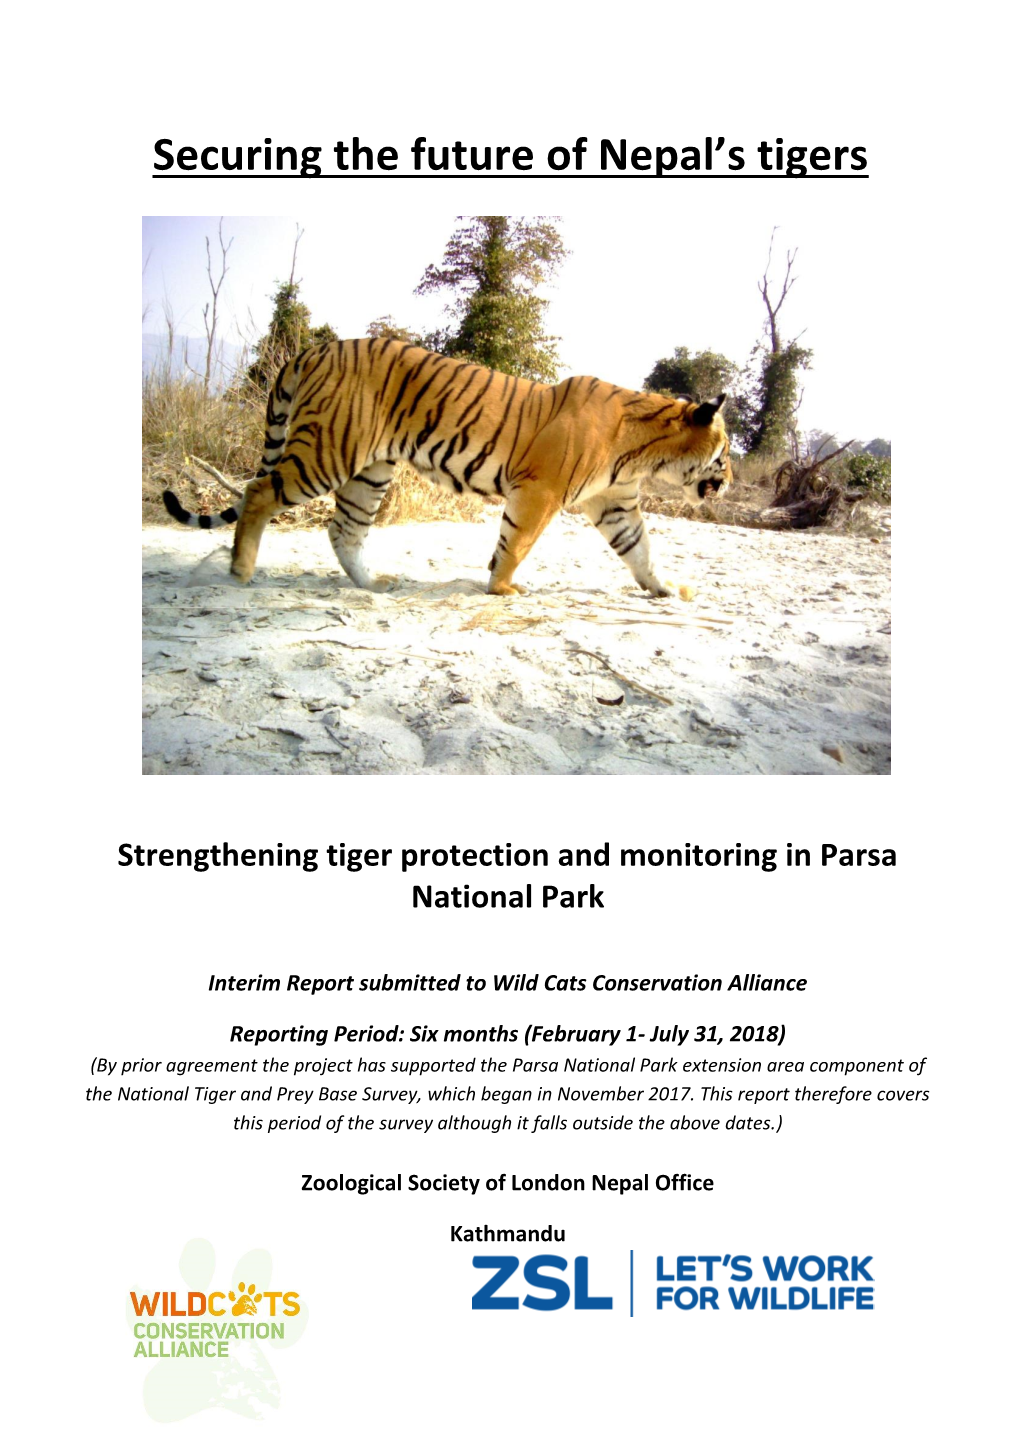 Securing the Future of Nepal's Tigers